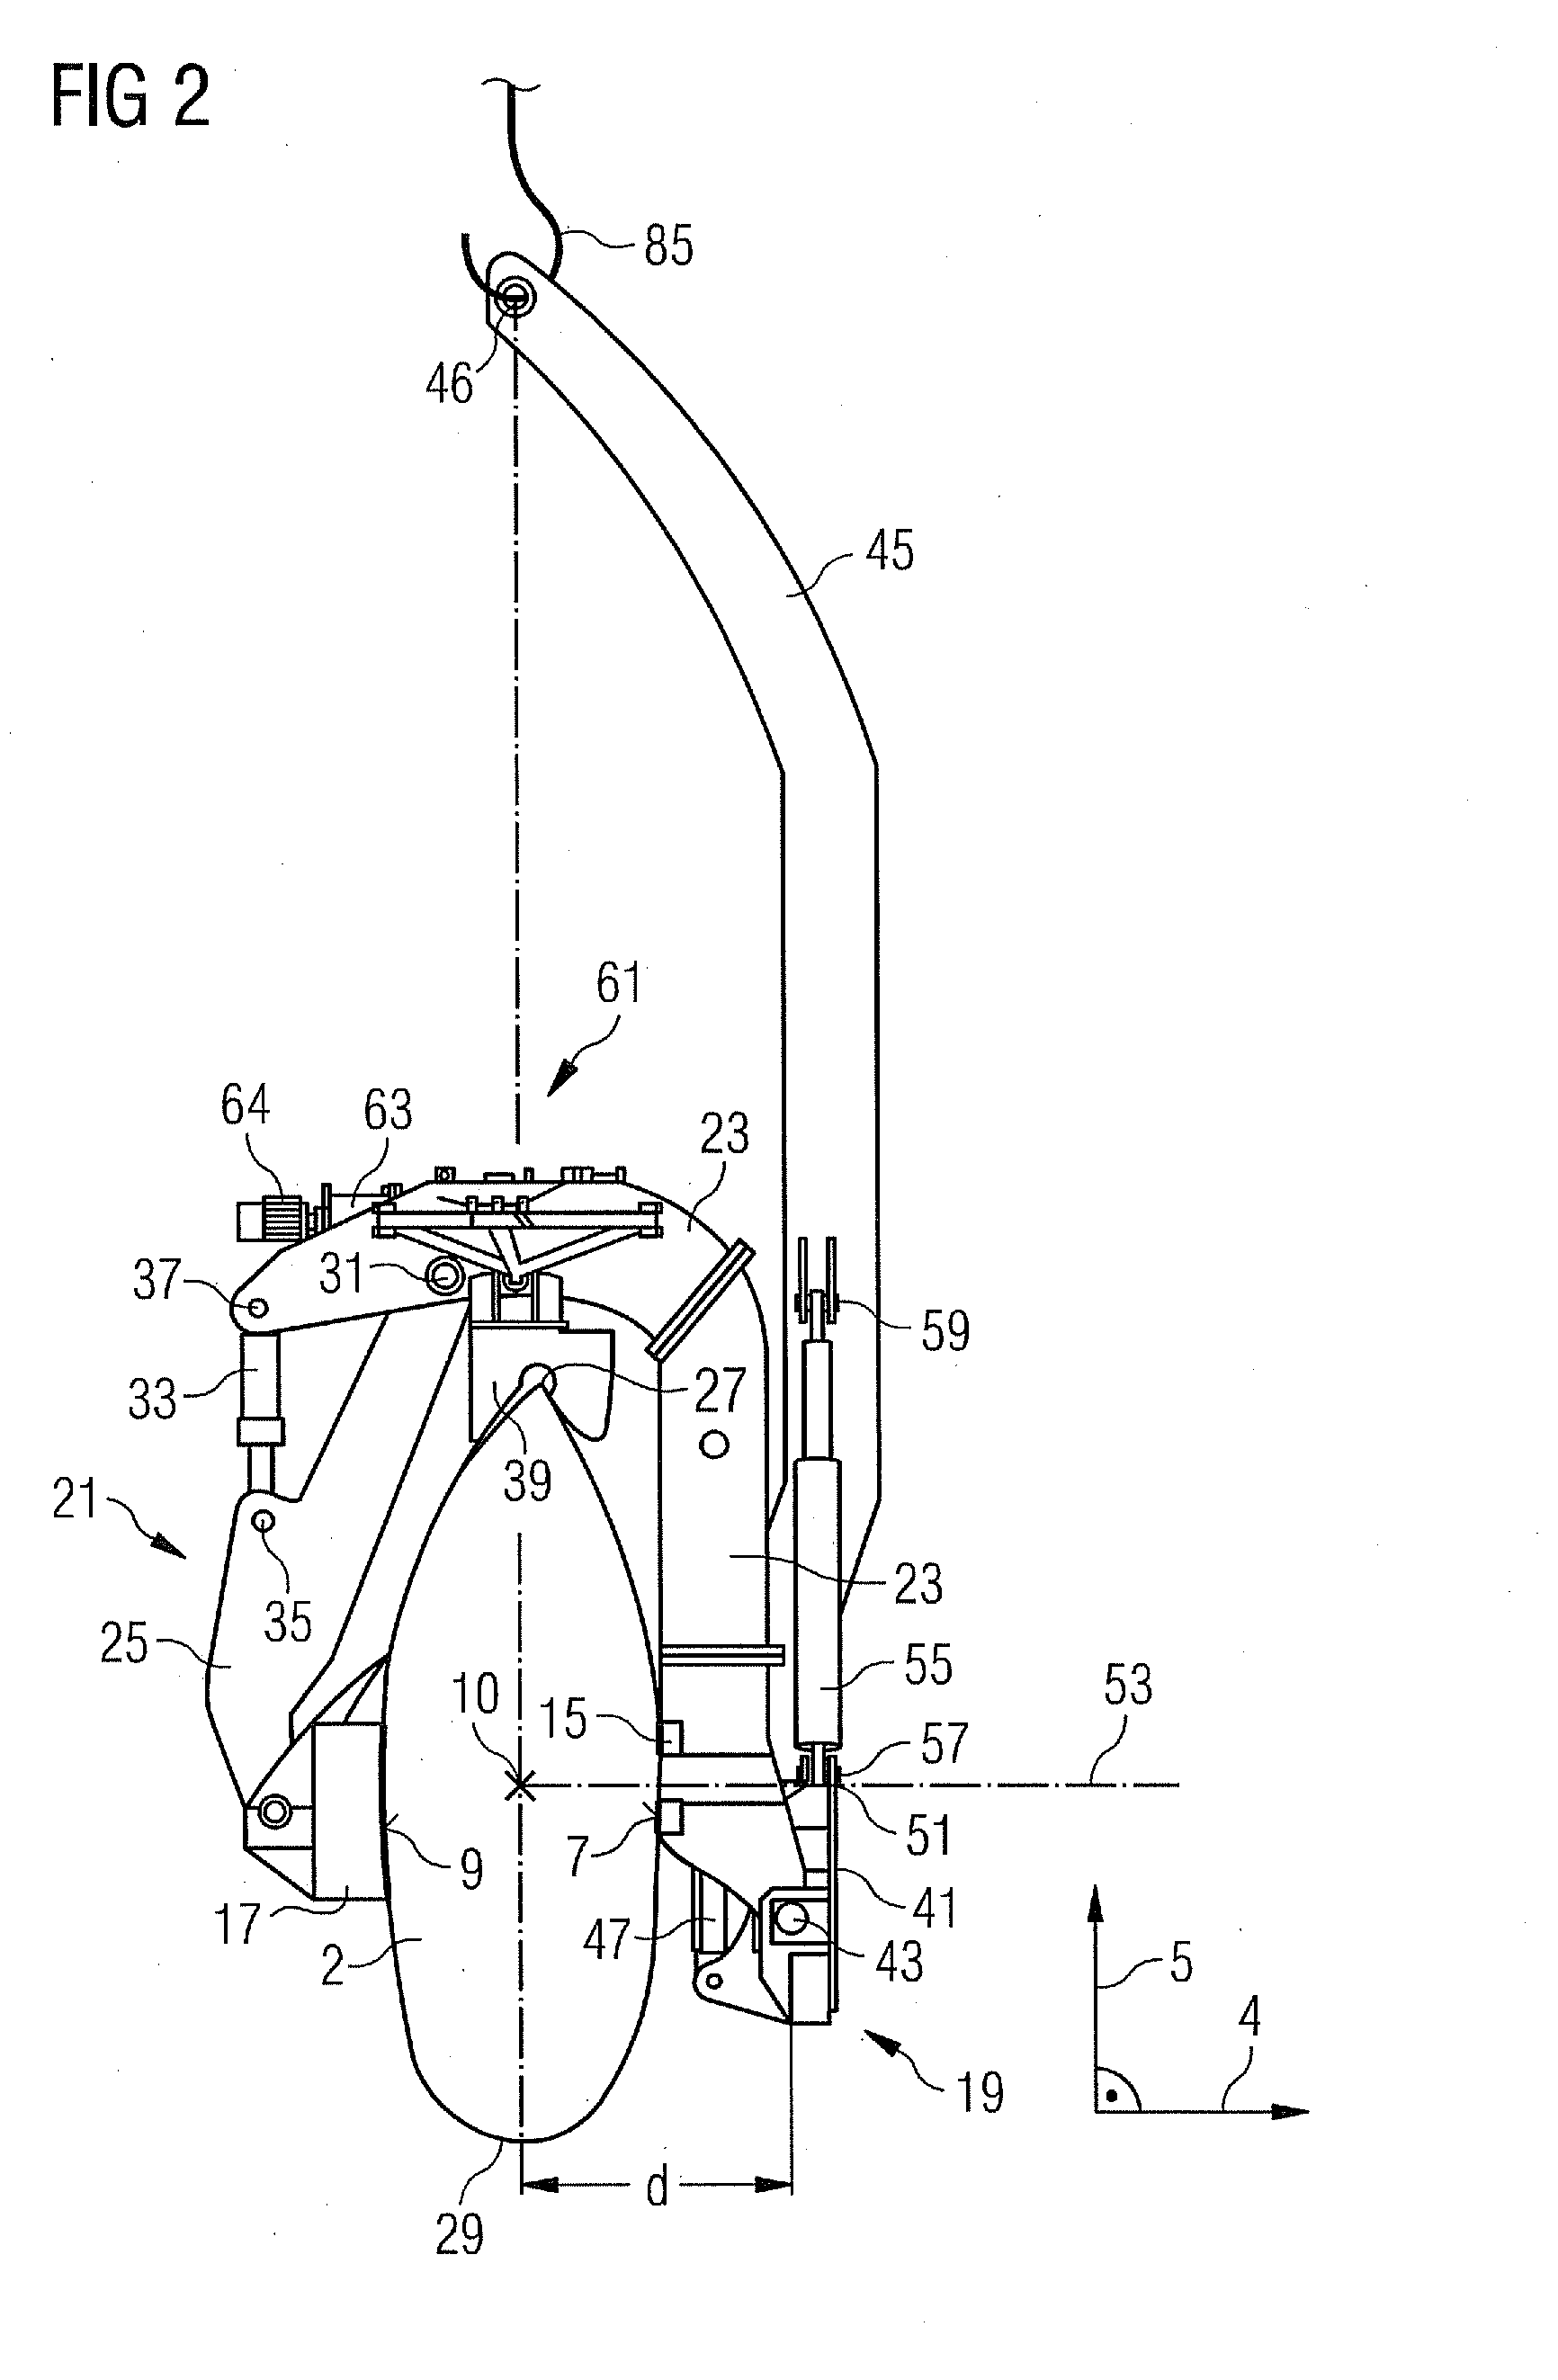 Clamp for clamping a blade for a wind turbine and method of installing wind turbine blades